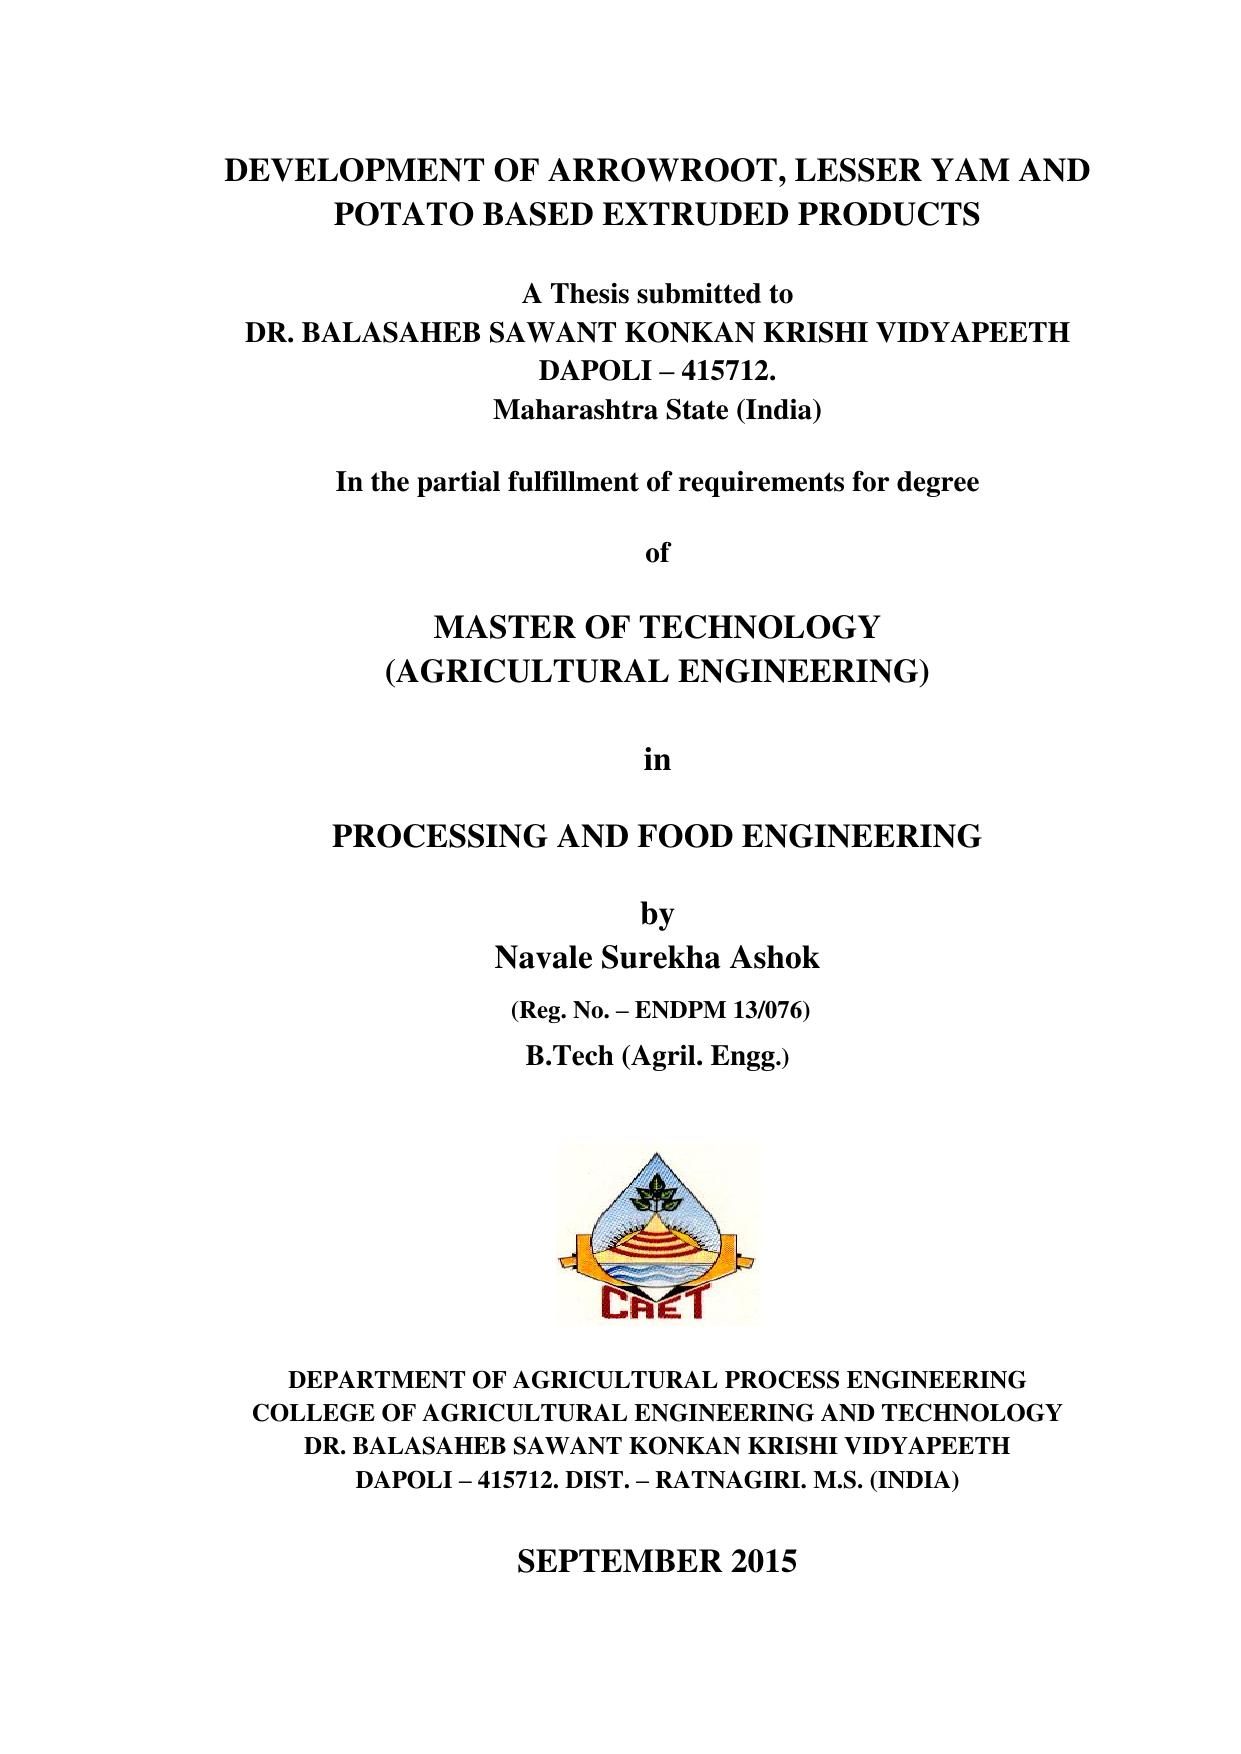 AGRICULTURAL ENGINEERING ( PDFDrive.com )